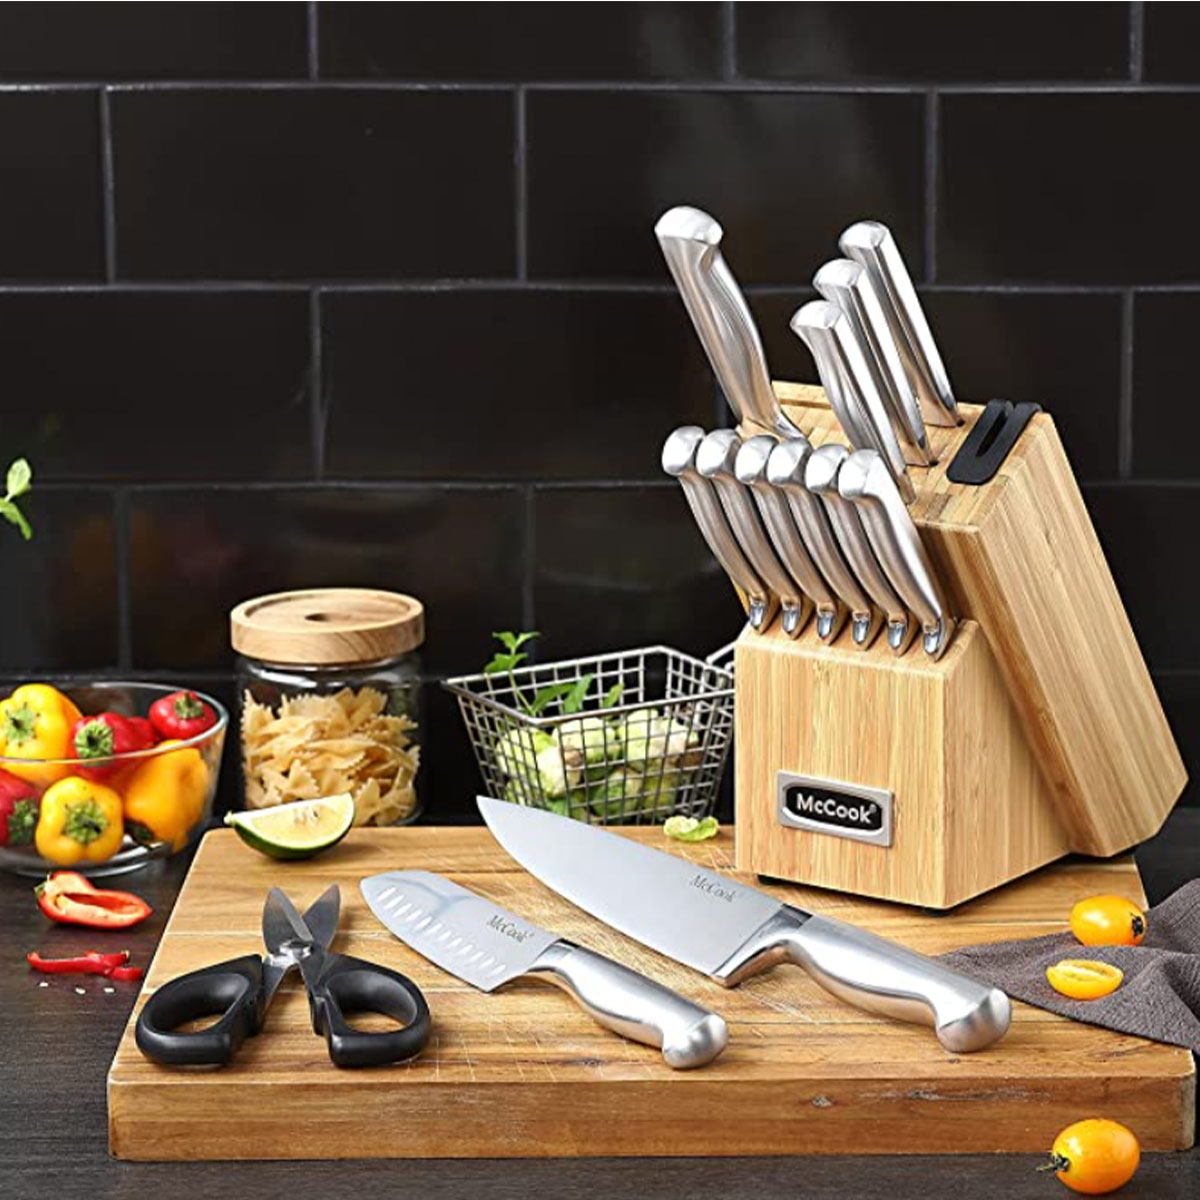 McCook MC21B Knife Sets Review. SEE THE PRICE ON